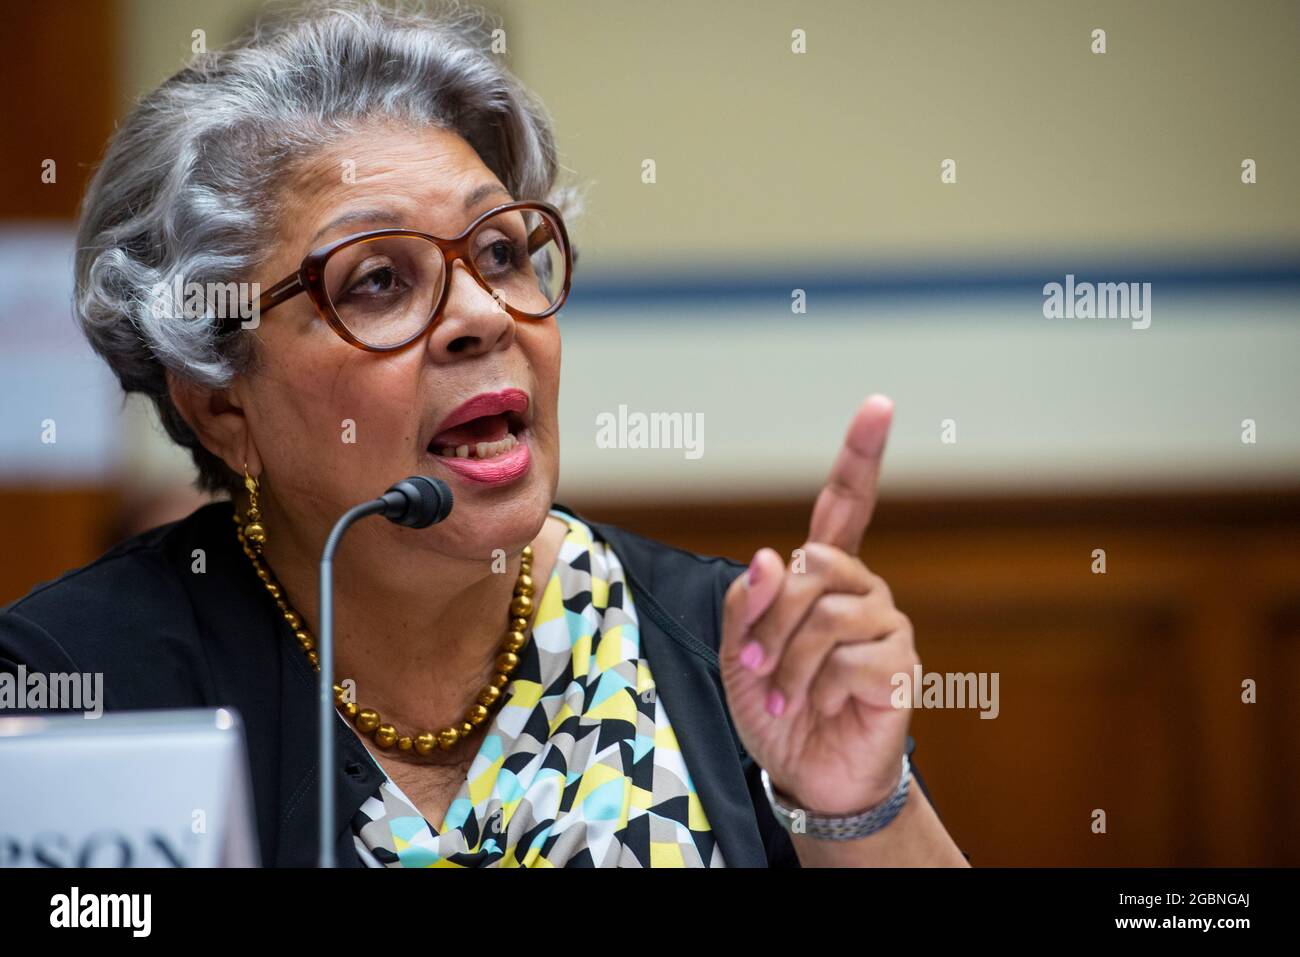 Washington, United States Of America. 29th July, 2021. Senfronia Thompson, Texas State Representative, Member, Select Committee on Constitutional Rights and Remedies, appears before a House Committee on Oversight and Reform hearing on Democracy in Danger: The Assault on Voting Rights in Texas, in the Rayburn House Office Building in Washington, DC, Thursday, July 29, 2021. Credit: Rod Lamkey/CNP/AdMedia/Newscom/Alamy Live News Stock Photo